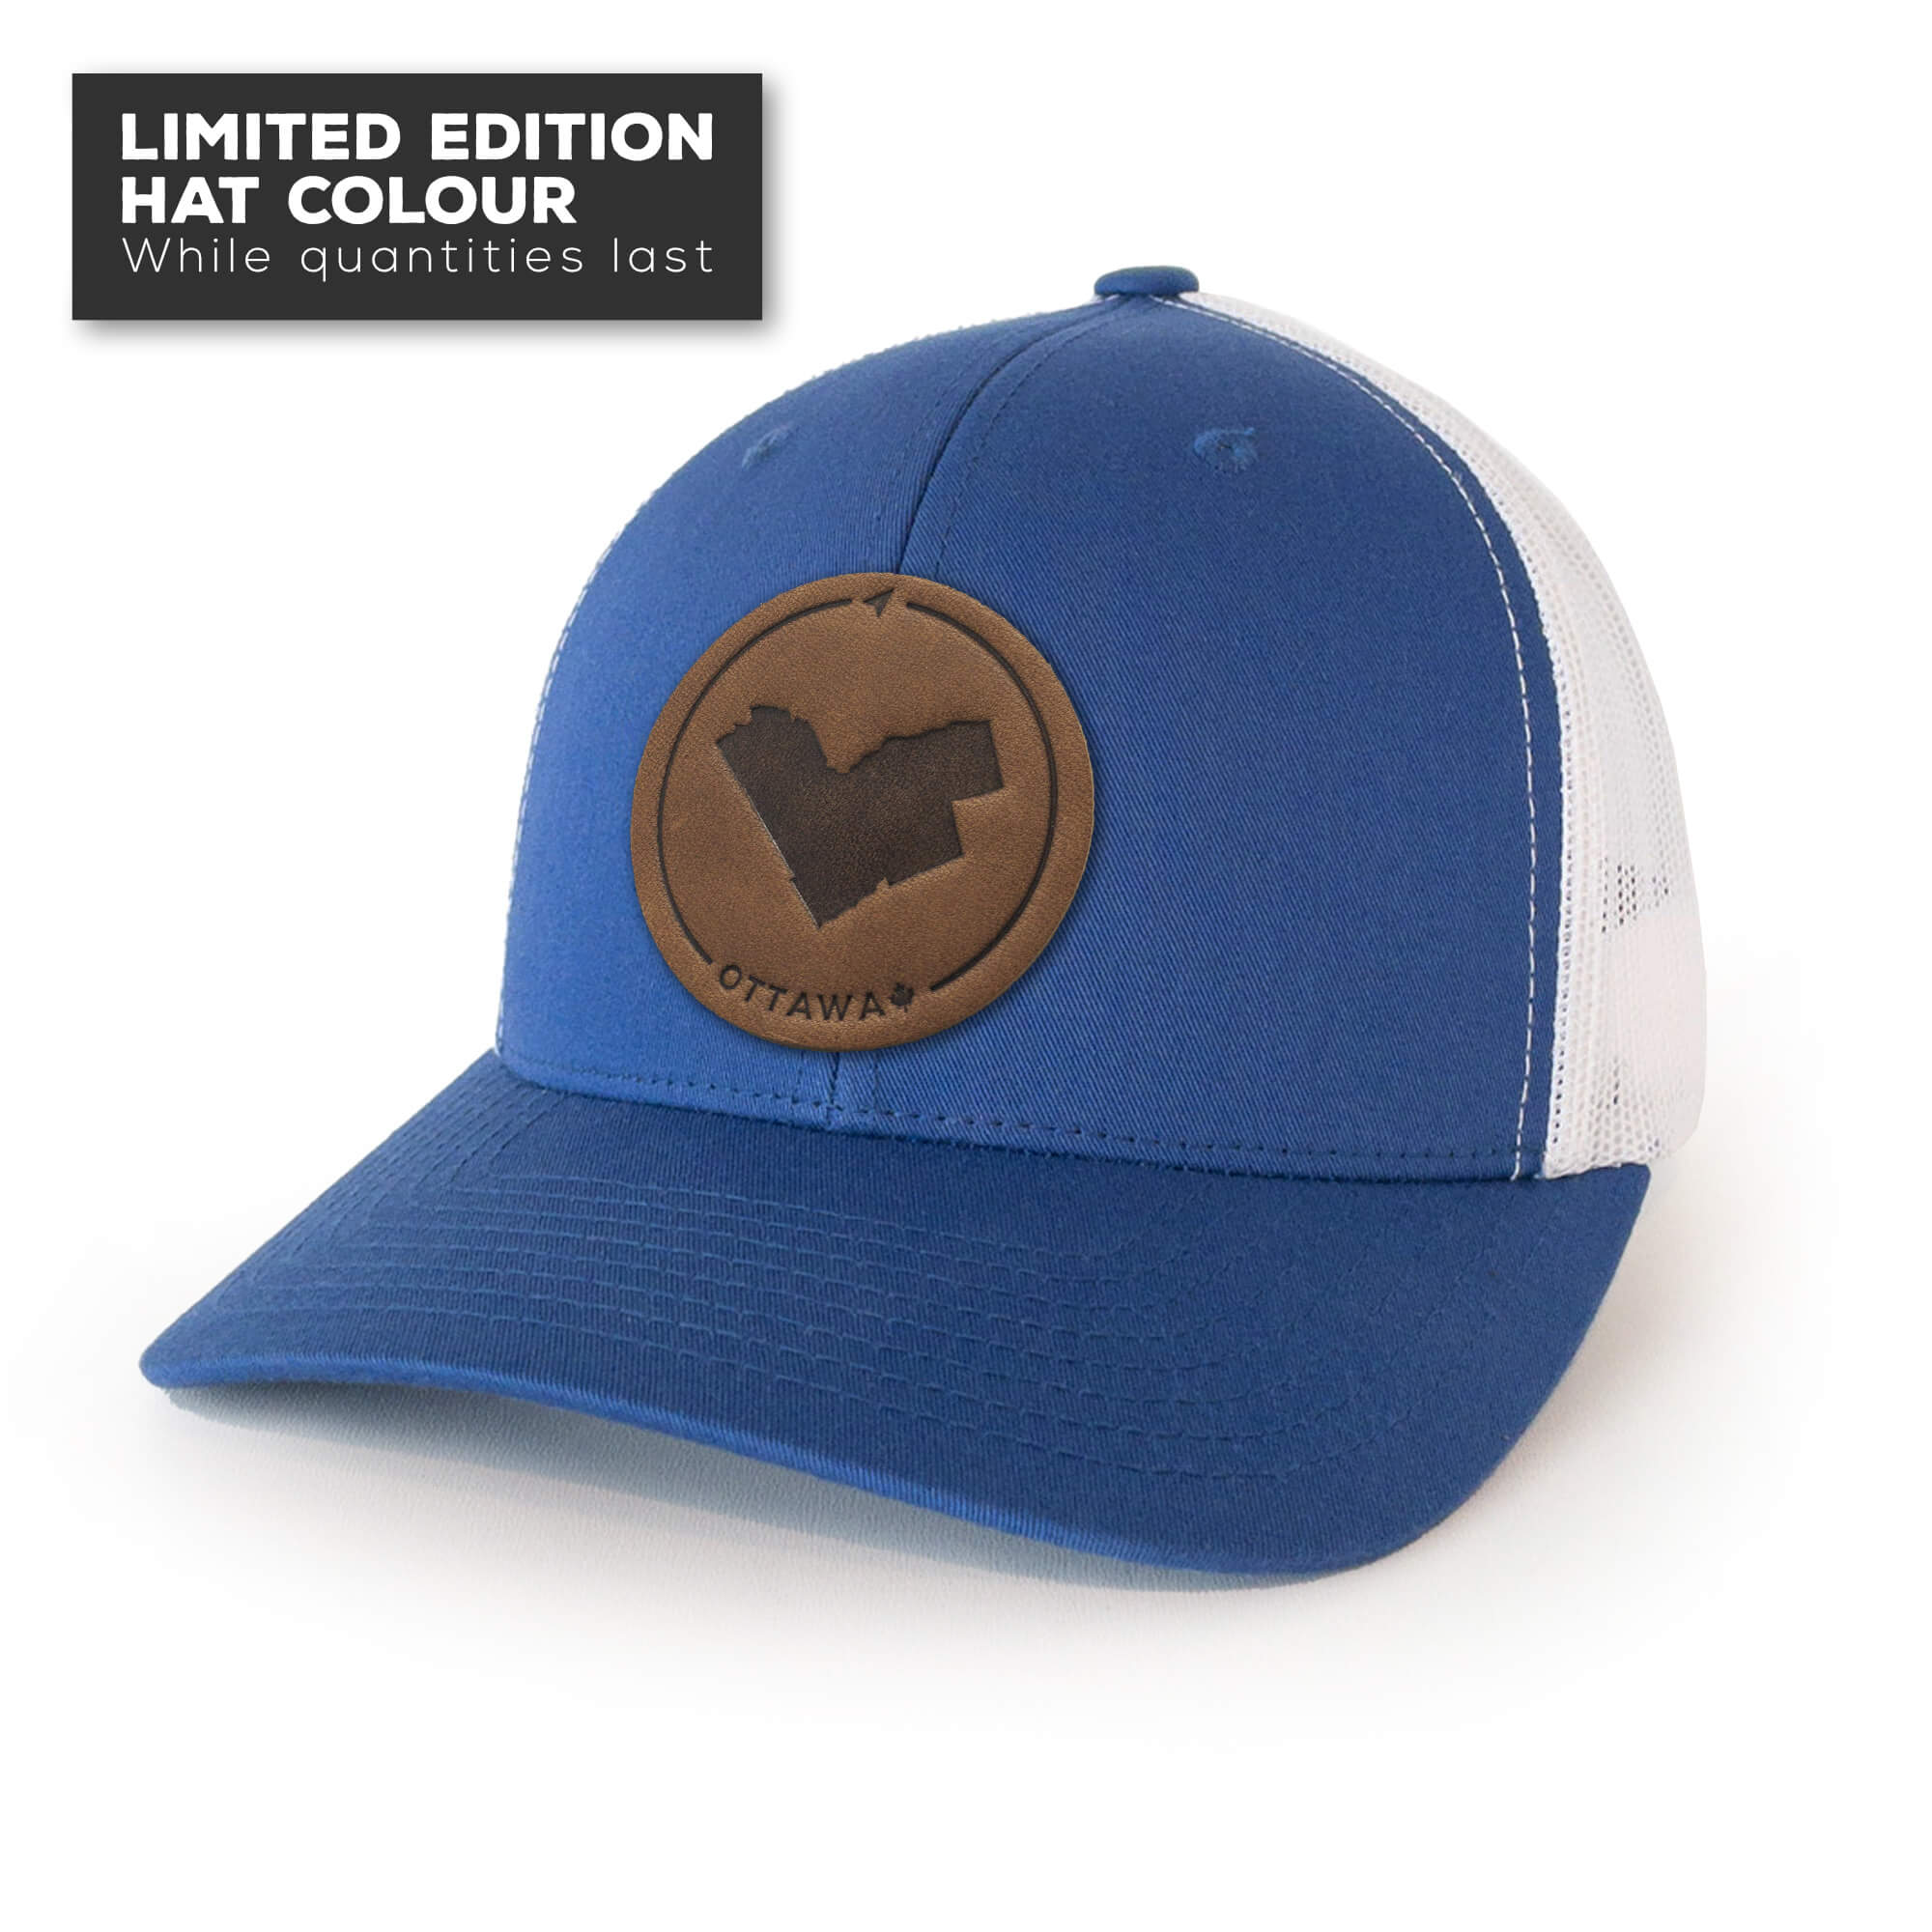 Royal Blue trucker hat with full-grain leather patch of Ottawa